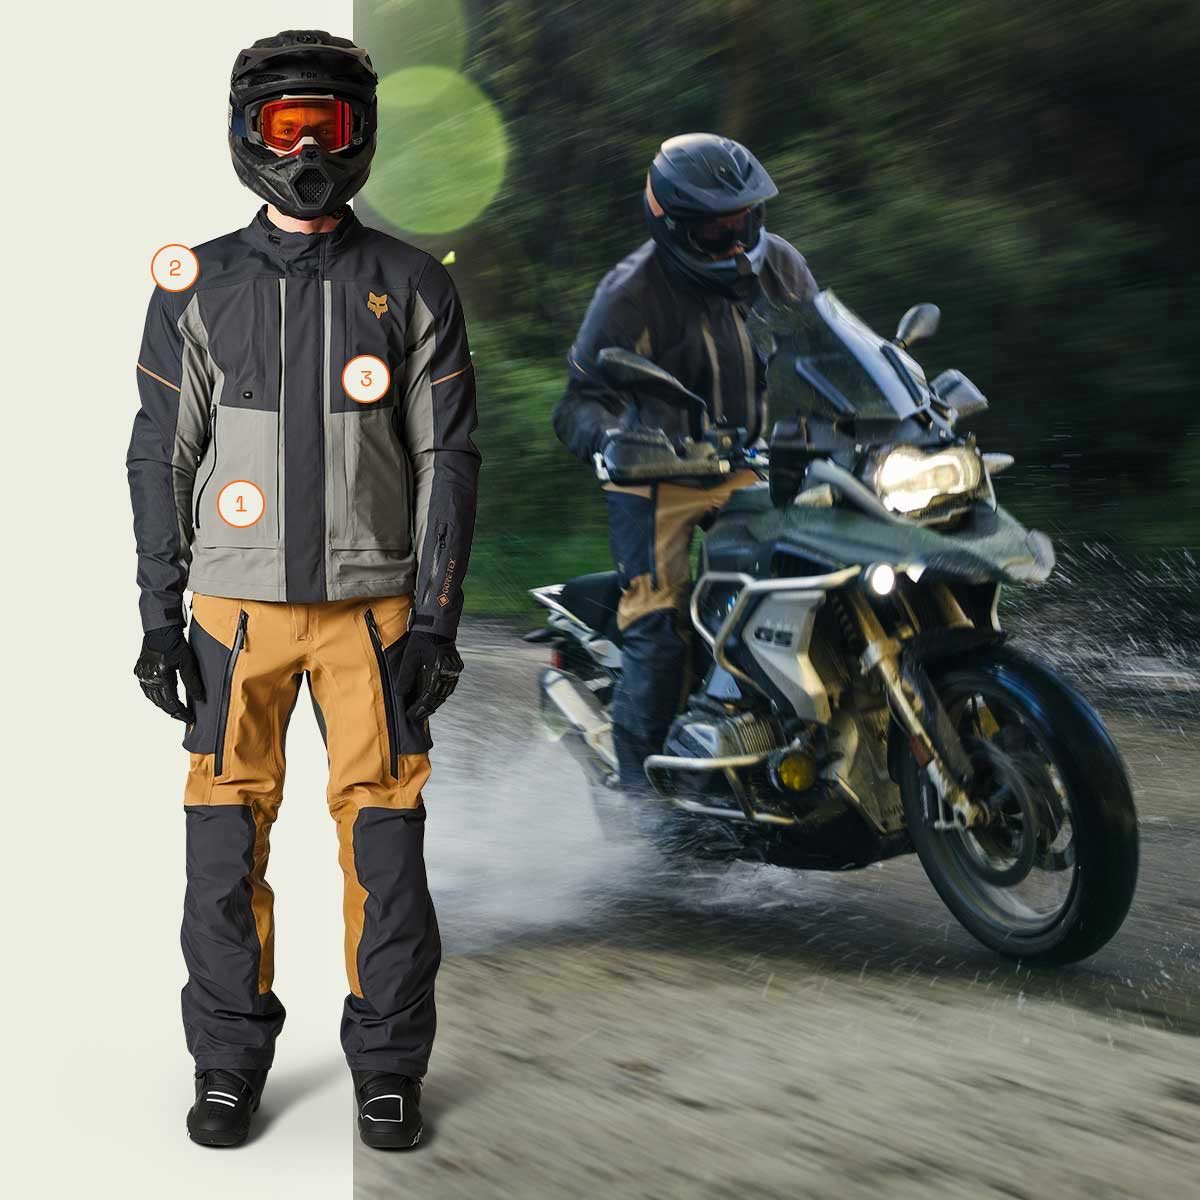 A model wearing the Ranger Adventure gear stands next to a rider speeding along a wet hard-packed trail.